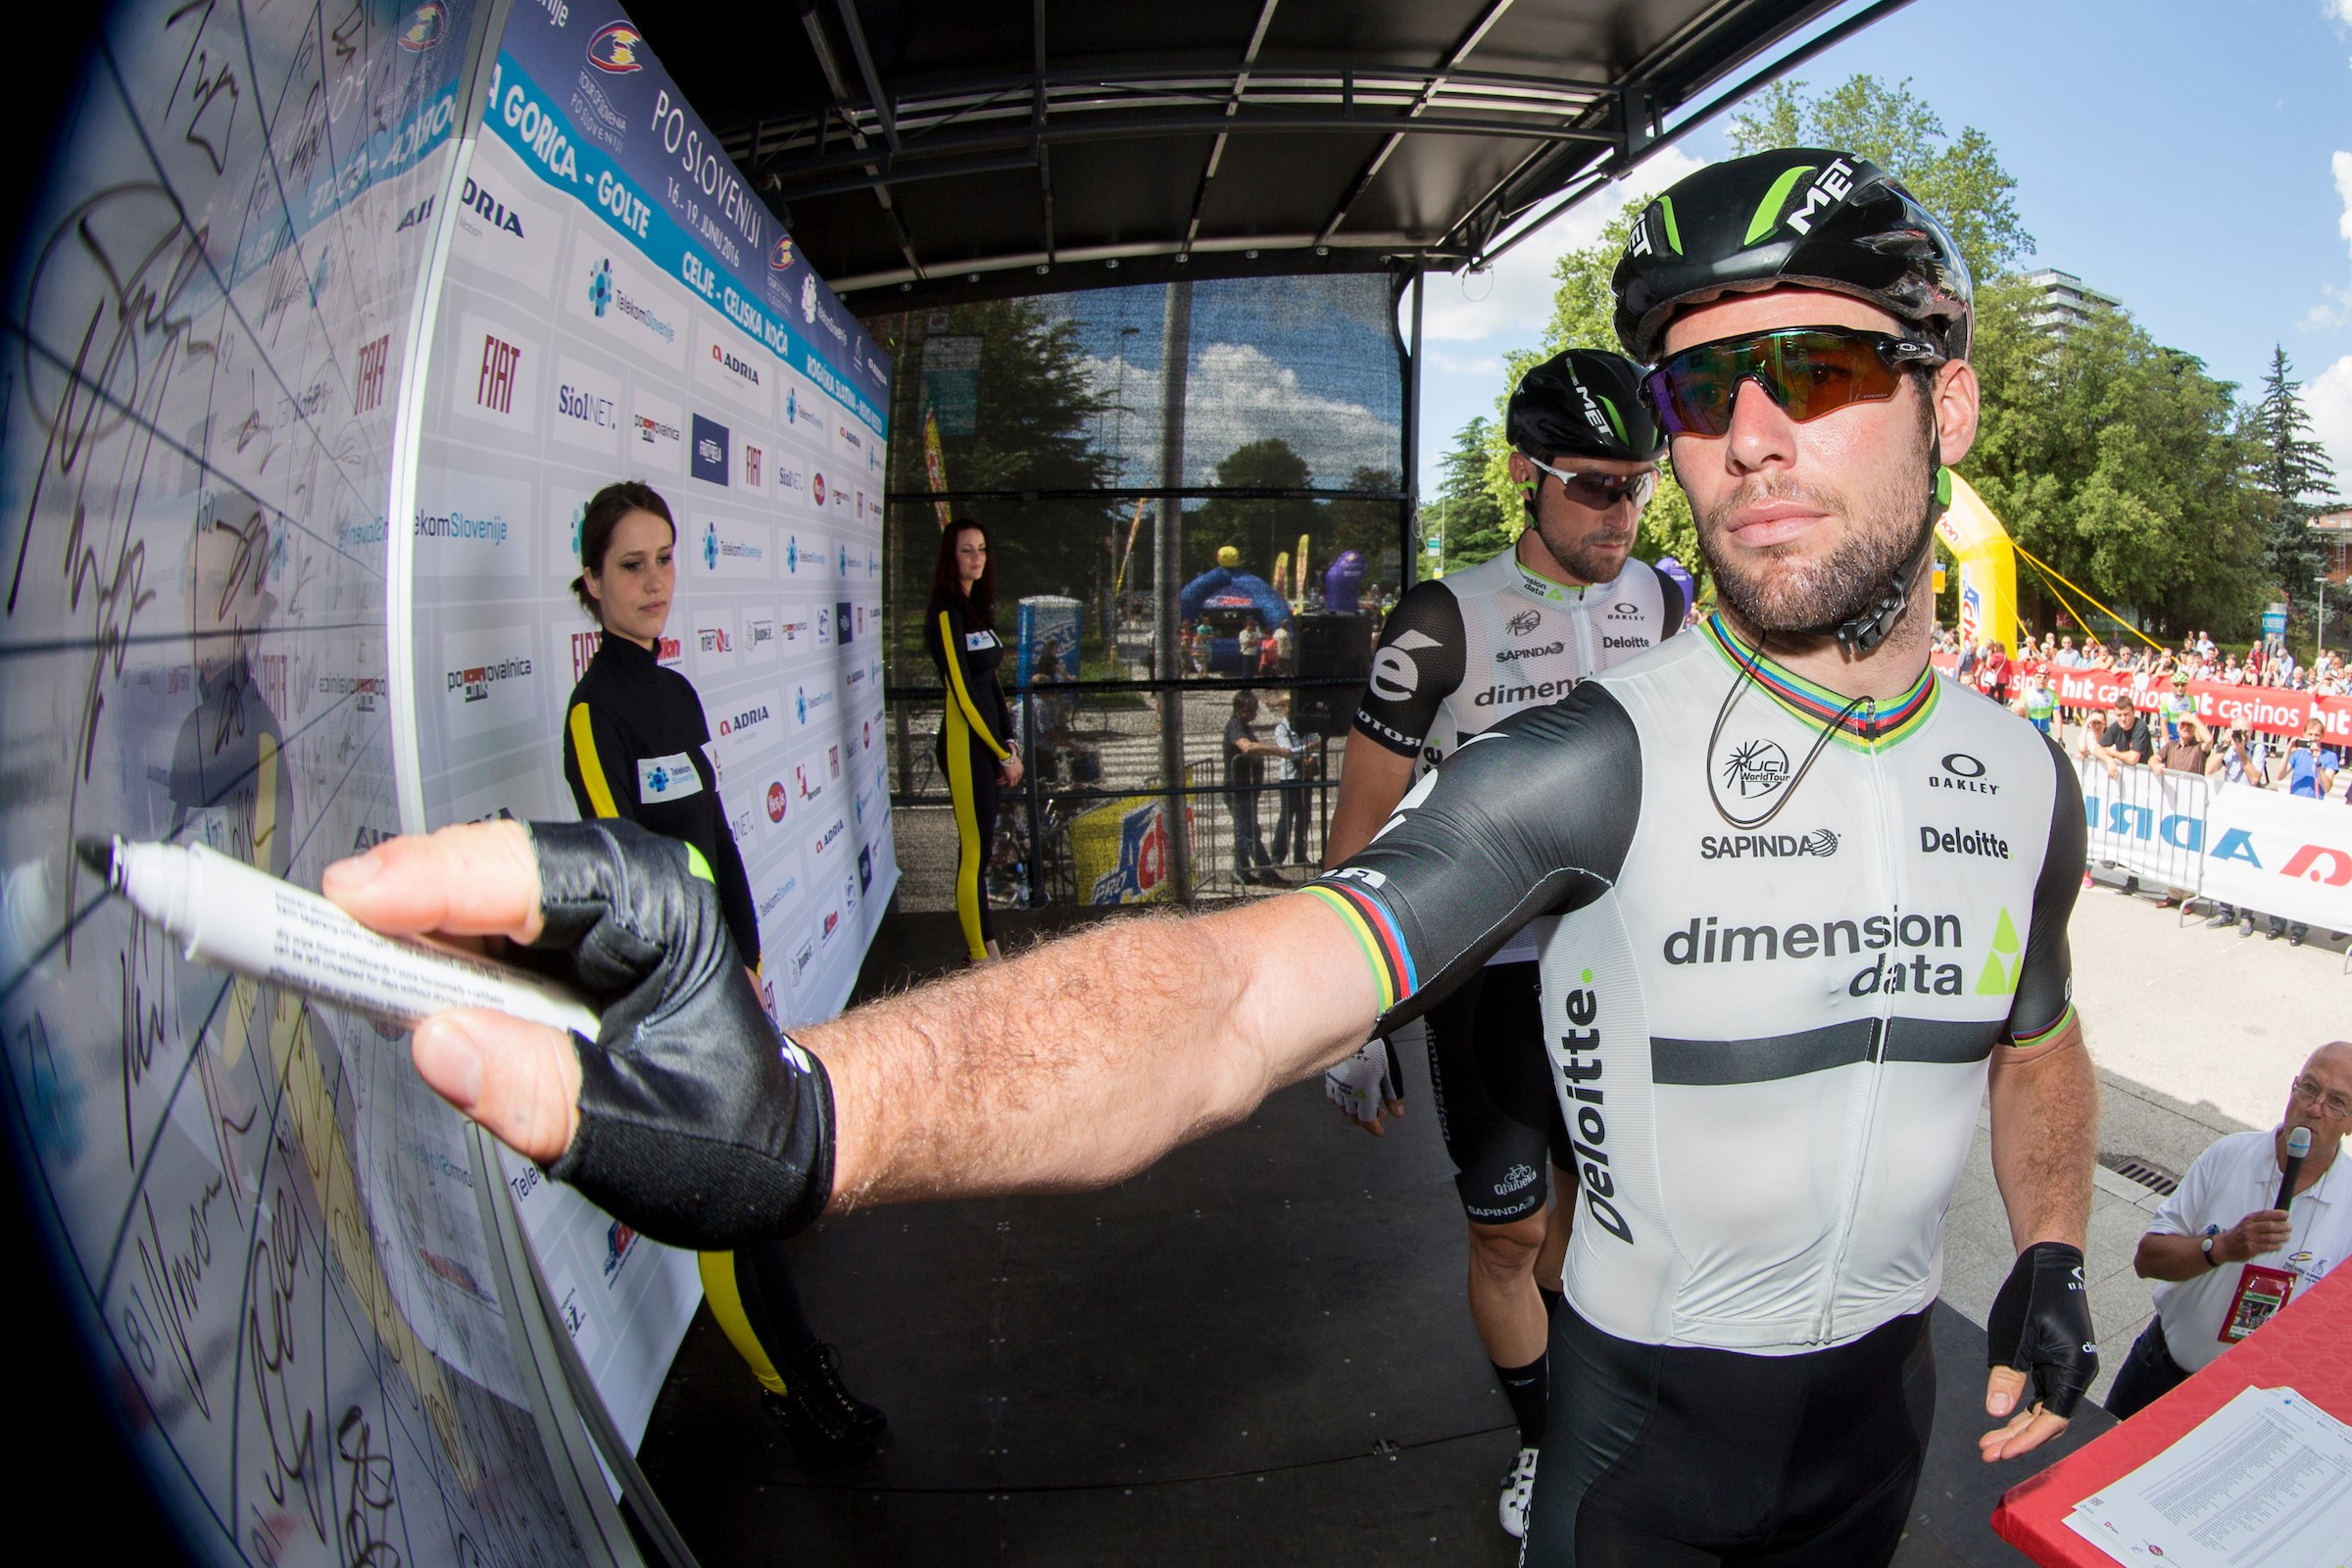 Mark Cavendish is coming back to Tour of Slovenia